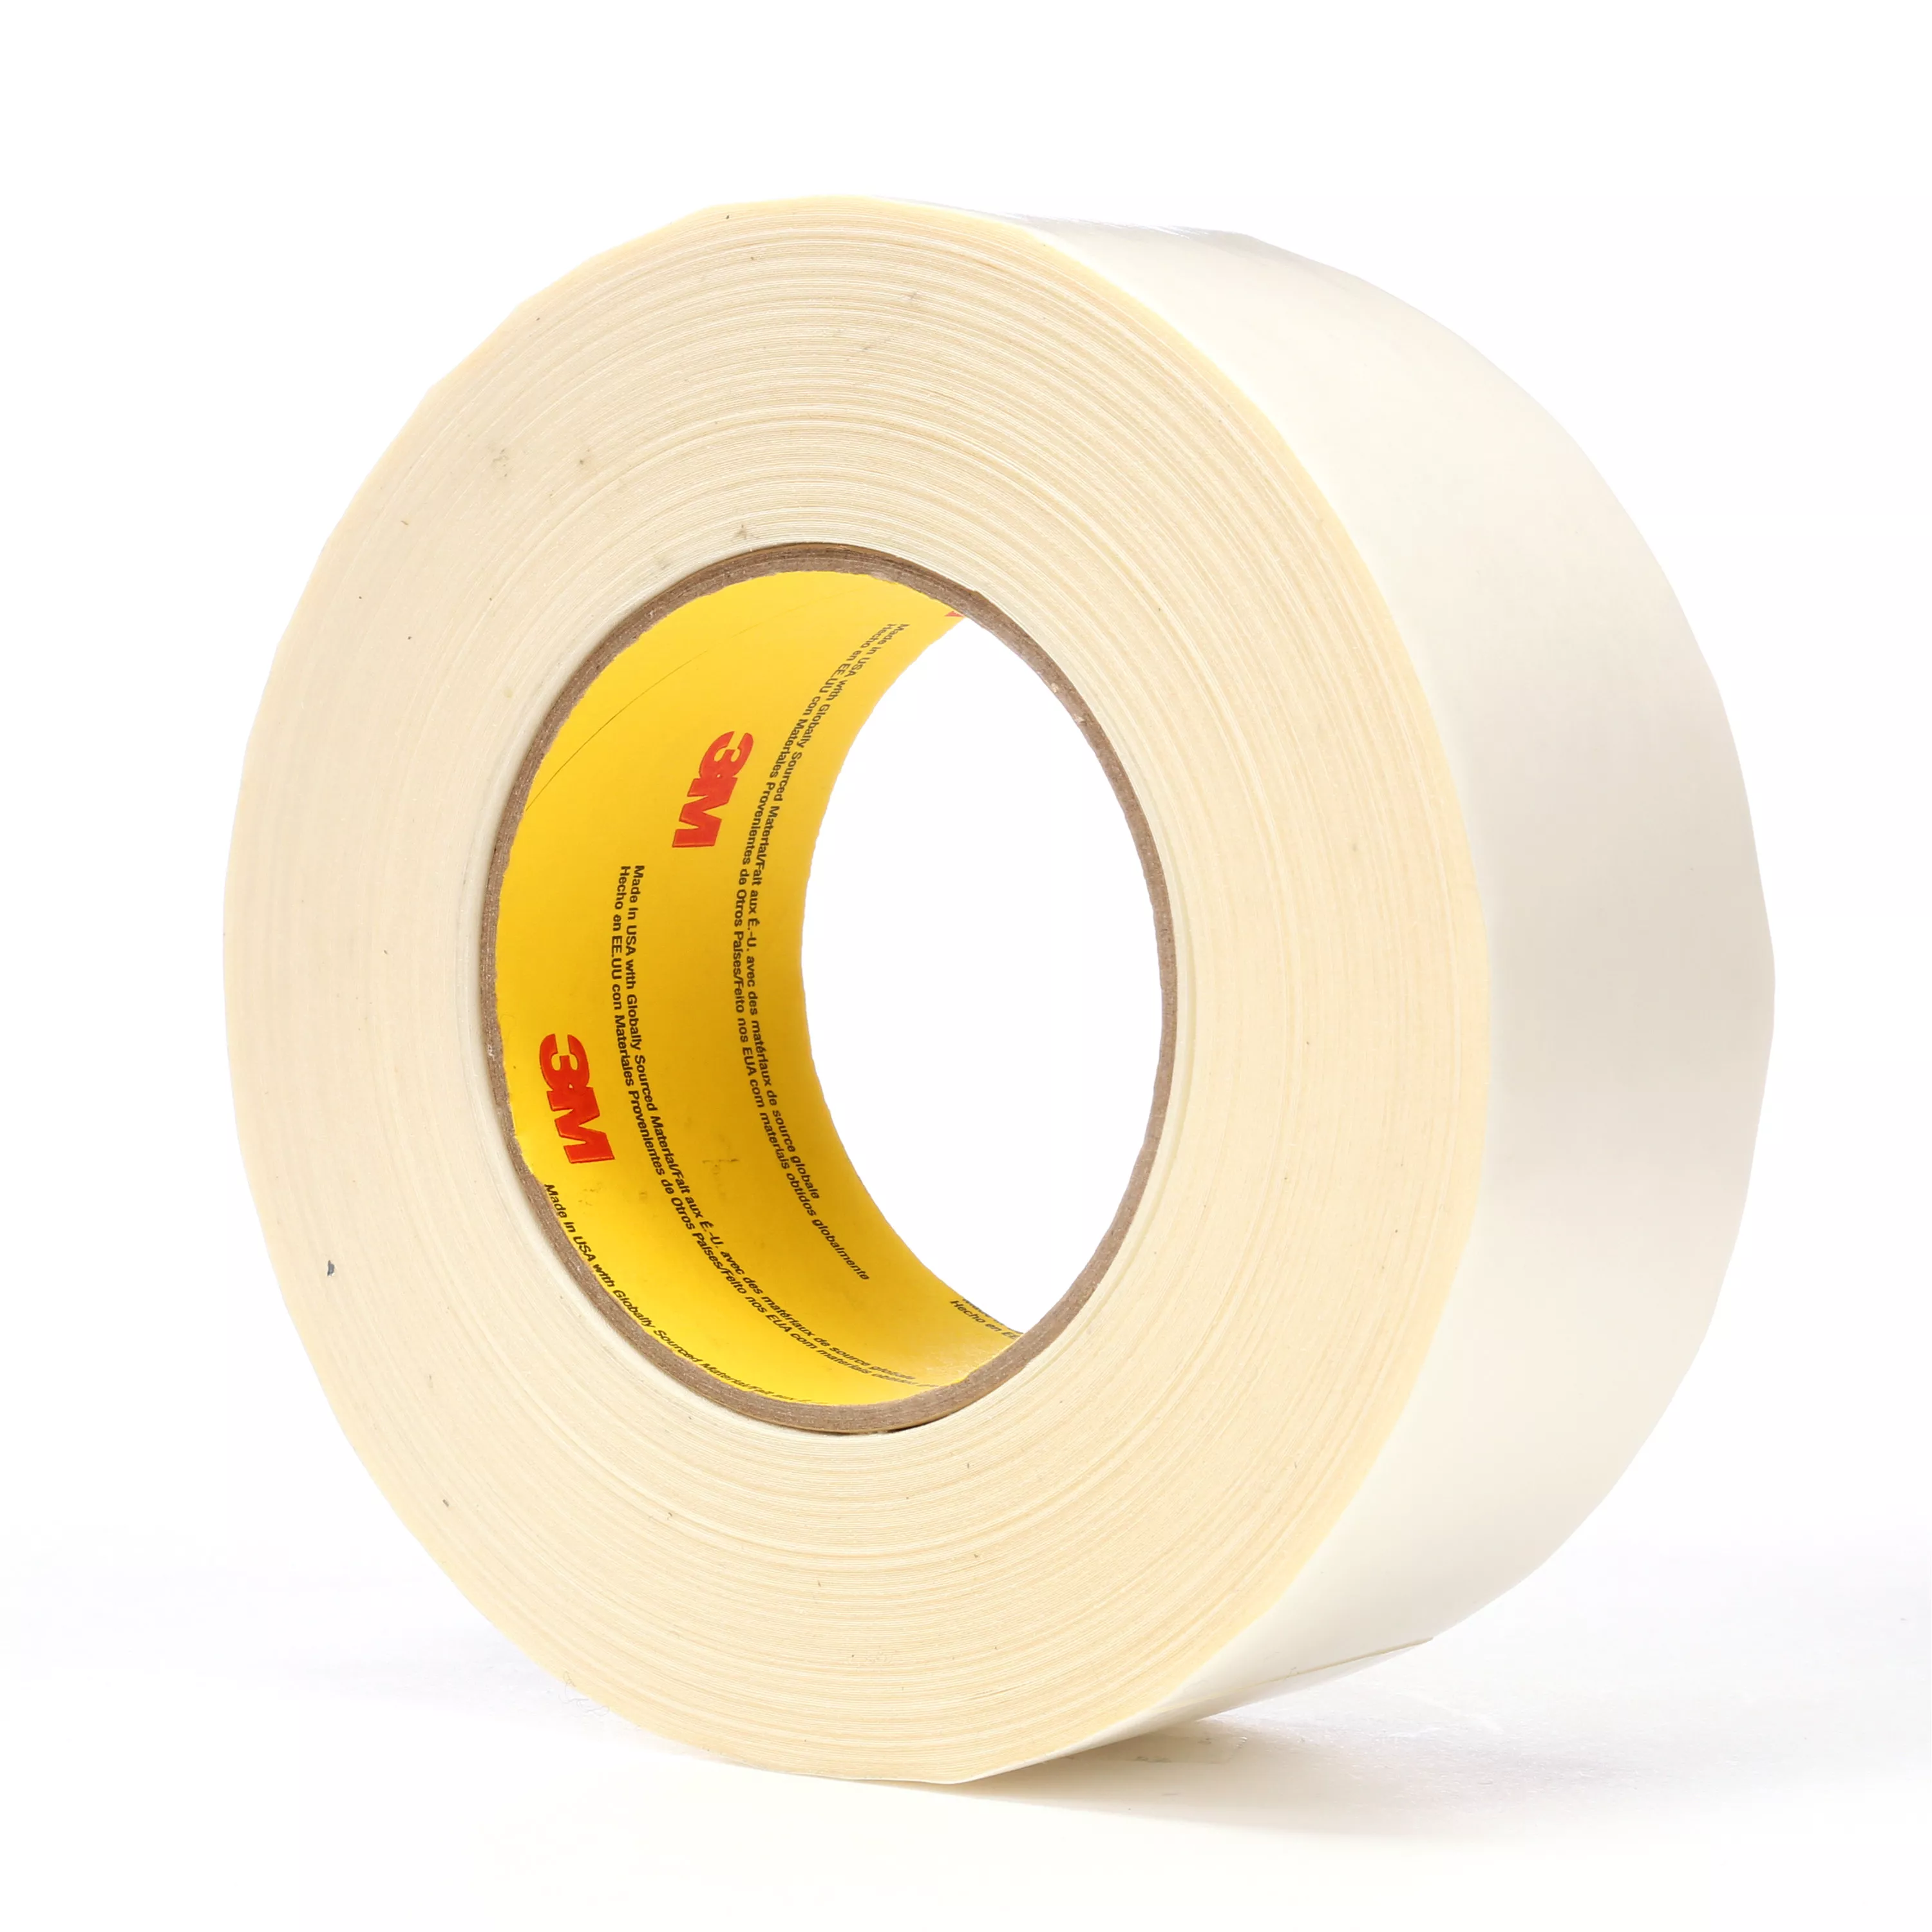 3M™ Double Coated Tape 9740, Clear, 48 mm x 55 m, 3.5 mil, 24 Roll/Case